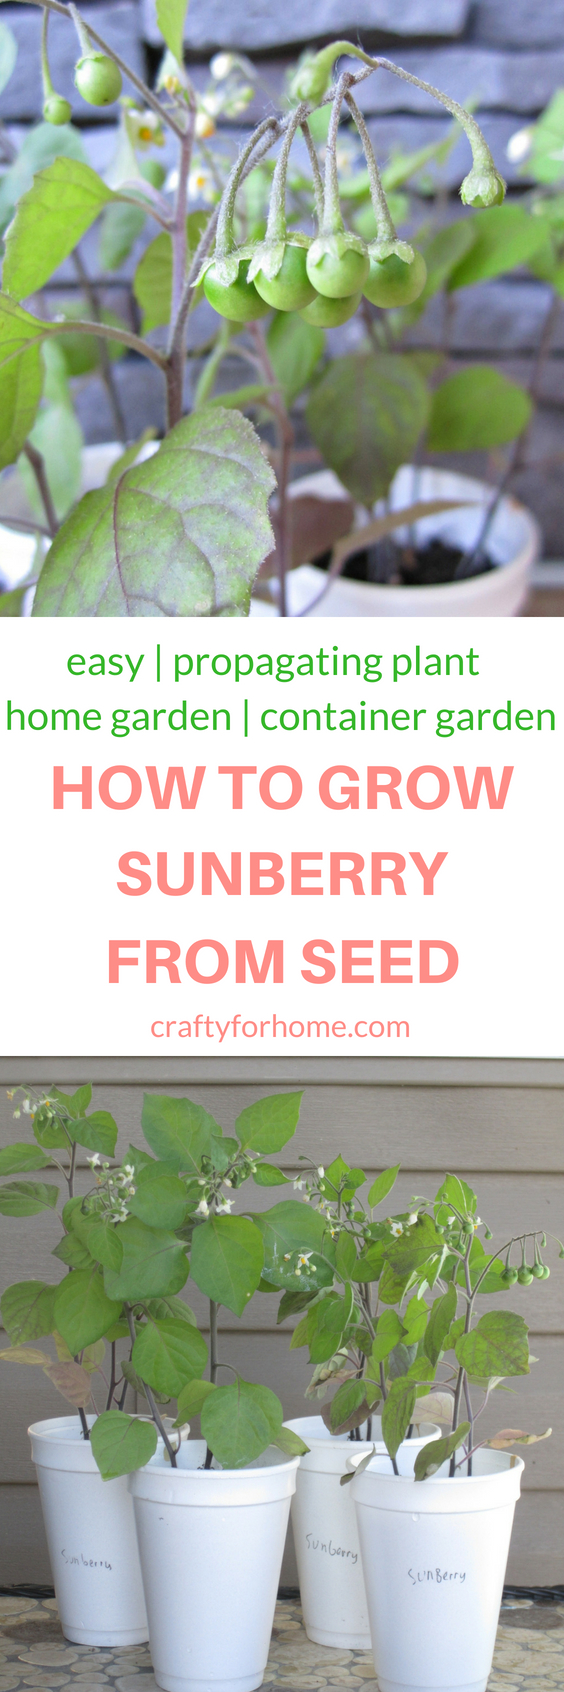 The easiest and simple way how to grow sunberry from seed indoors and get them ready to transplant into their final spot in the garden. Grow sunberry in the container if you have limited space for the garden #propagatingplant #indoorseeding#indoorgarden #containergarden #sunberry for full tutorial on craftyforhome.com